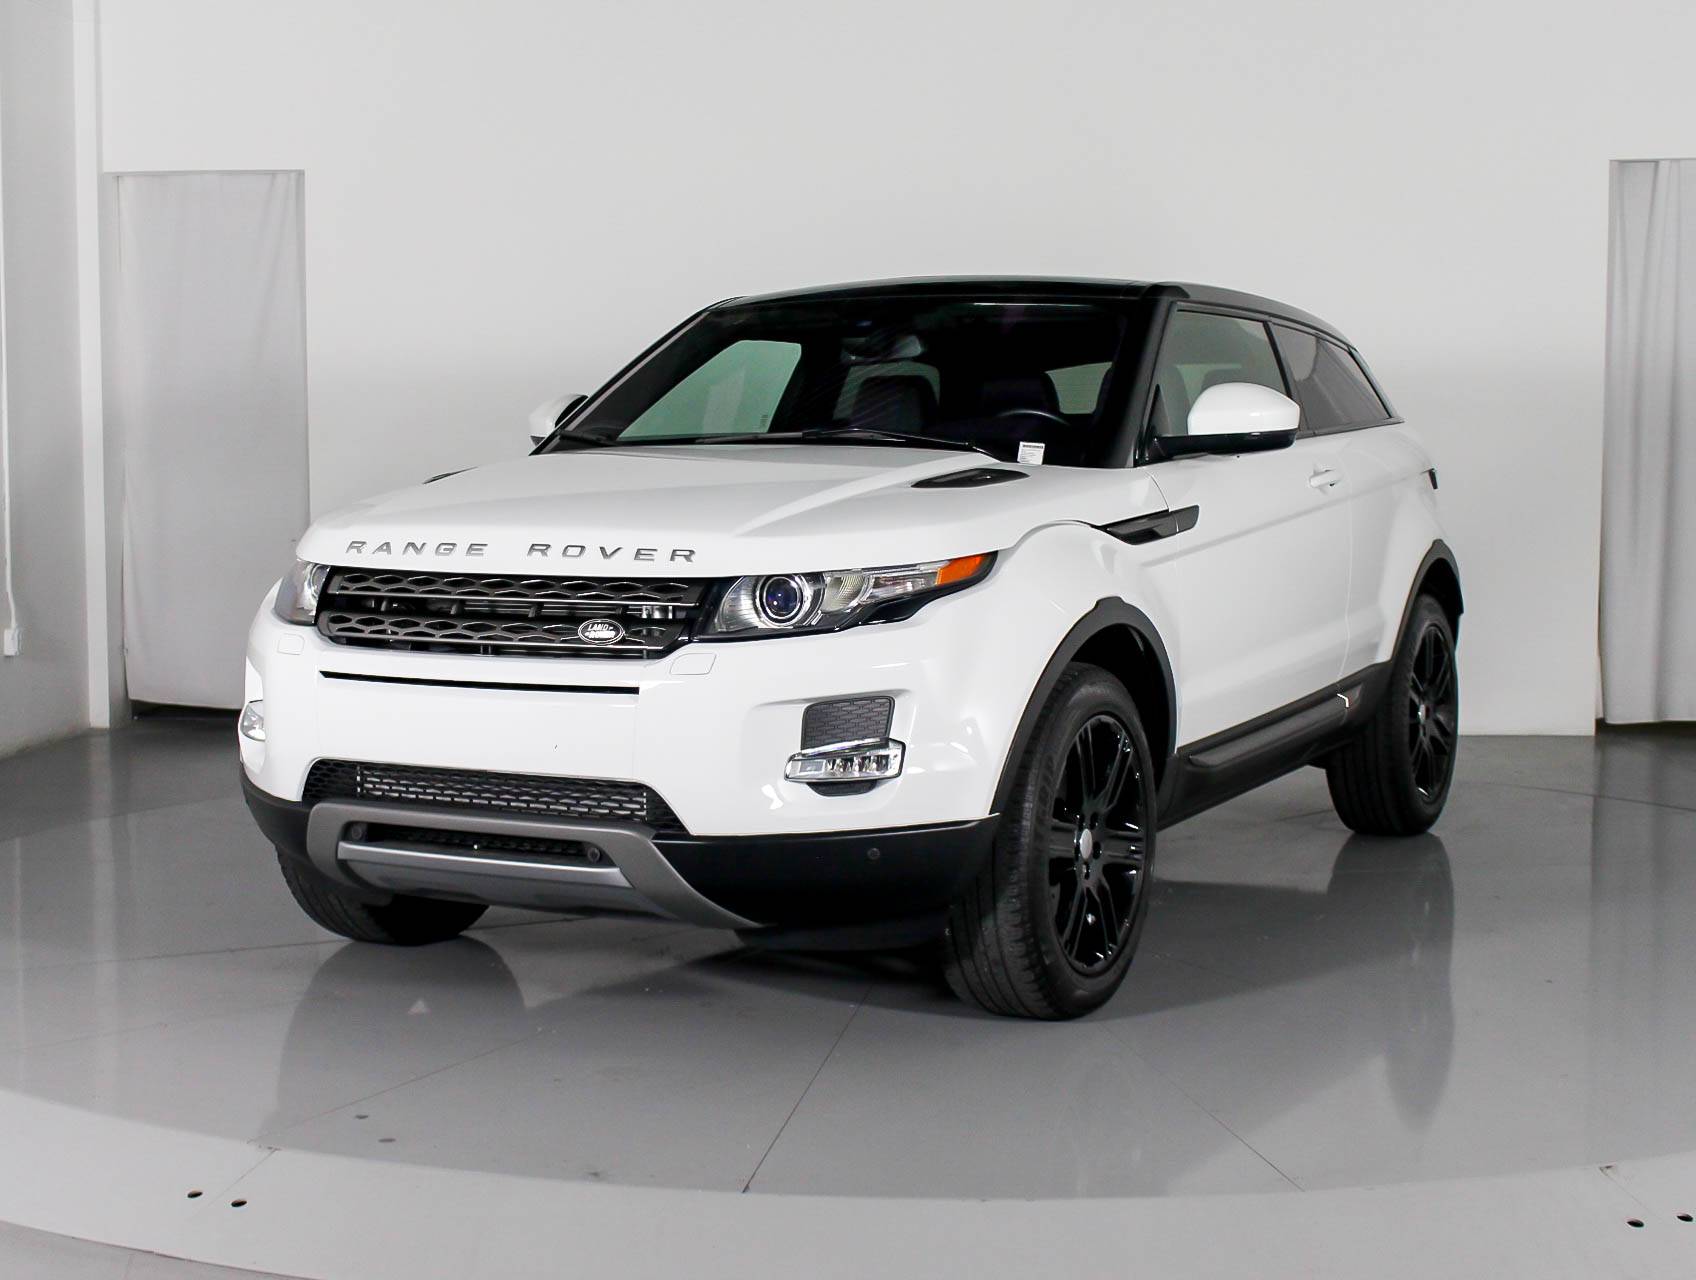 Range Rover Evoque Convertible For Sale Florida  . Range Rover Evoque P250 Se 2020 Brand New Three Years Warranty For More Details :